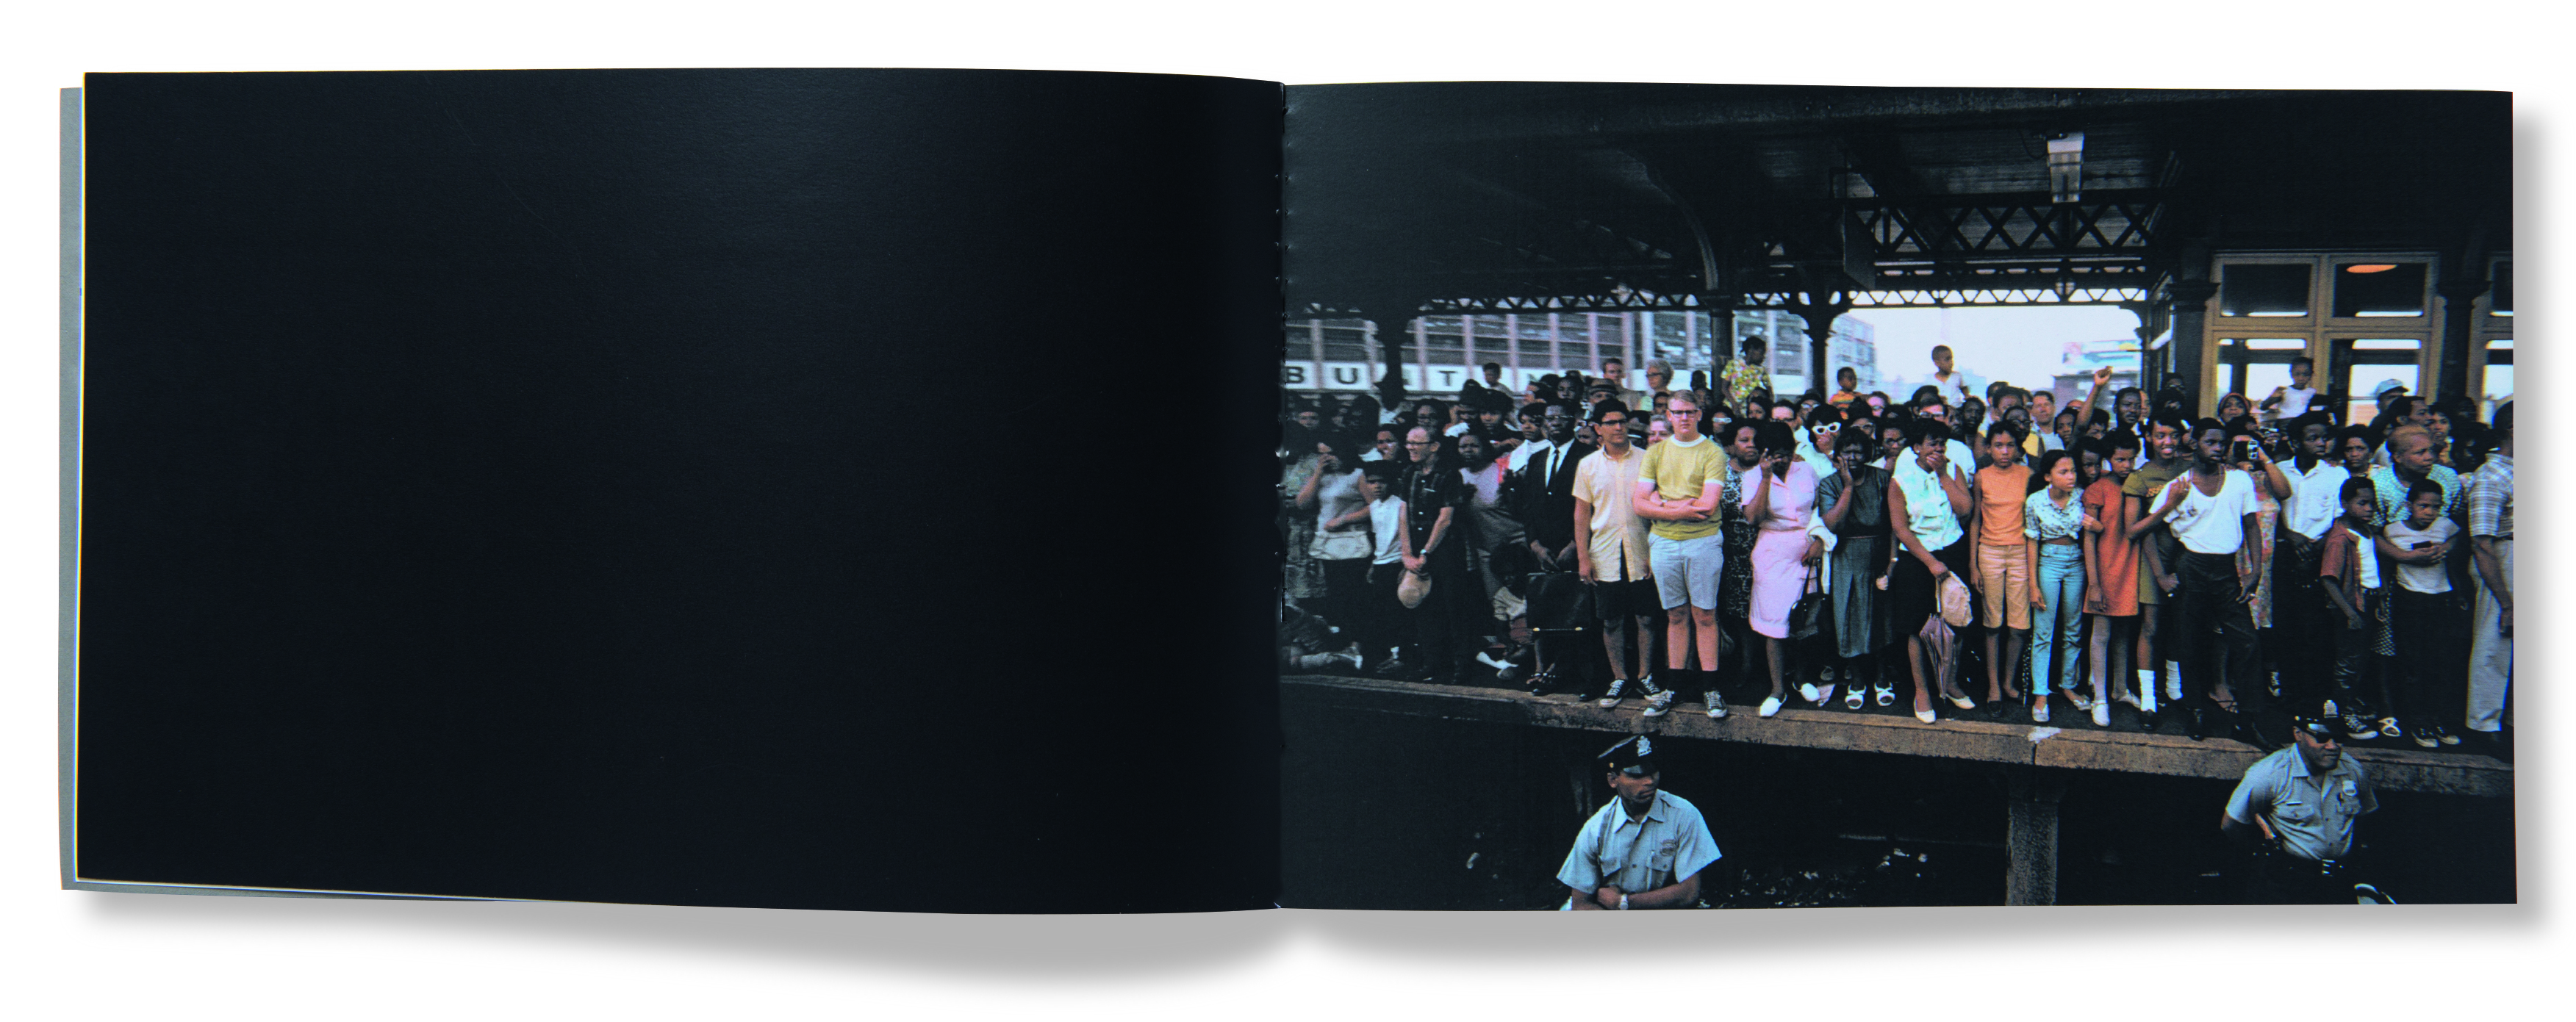 A spread from Paul Fusco RFK Funeral Train, as reproduced in Magnum Photobook: The Catalogue Raisonné